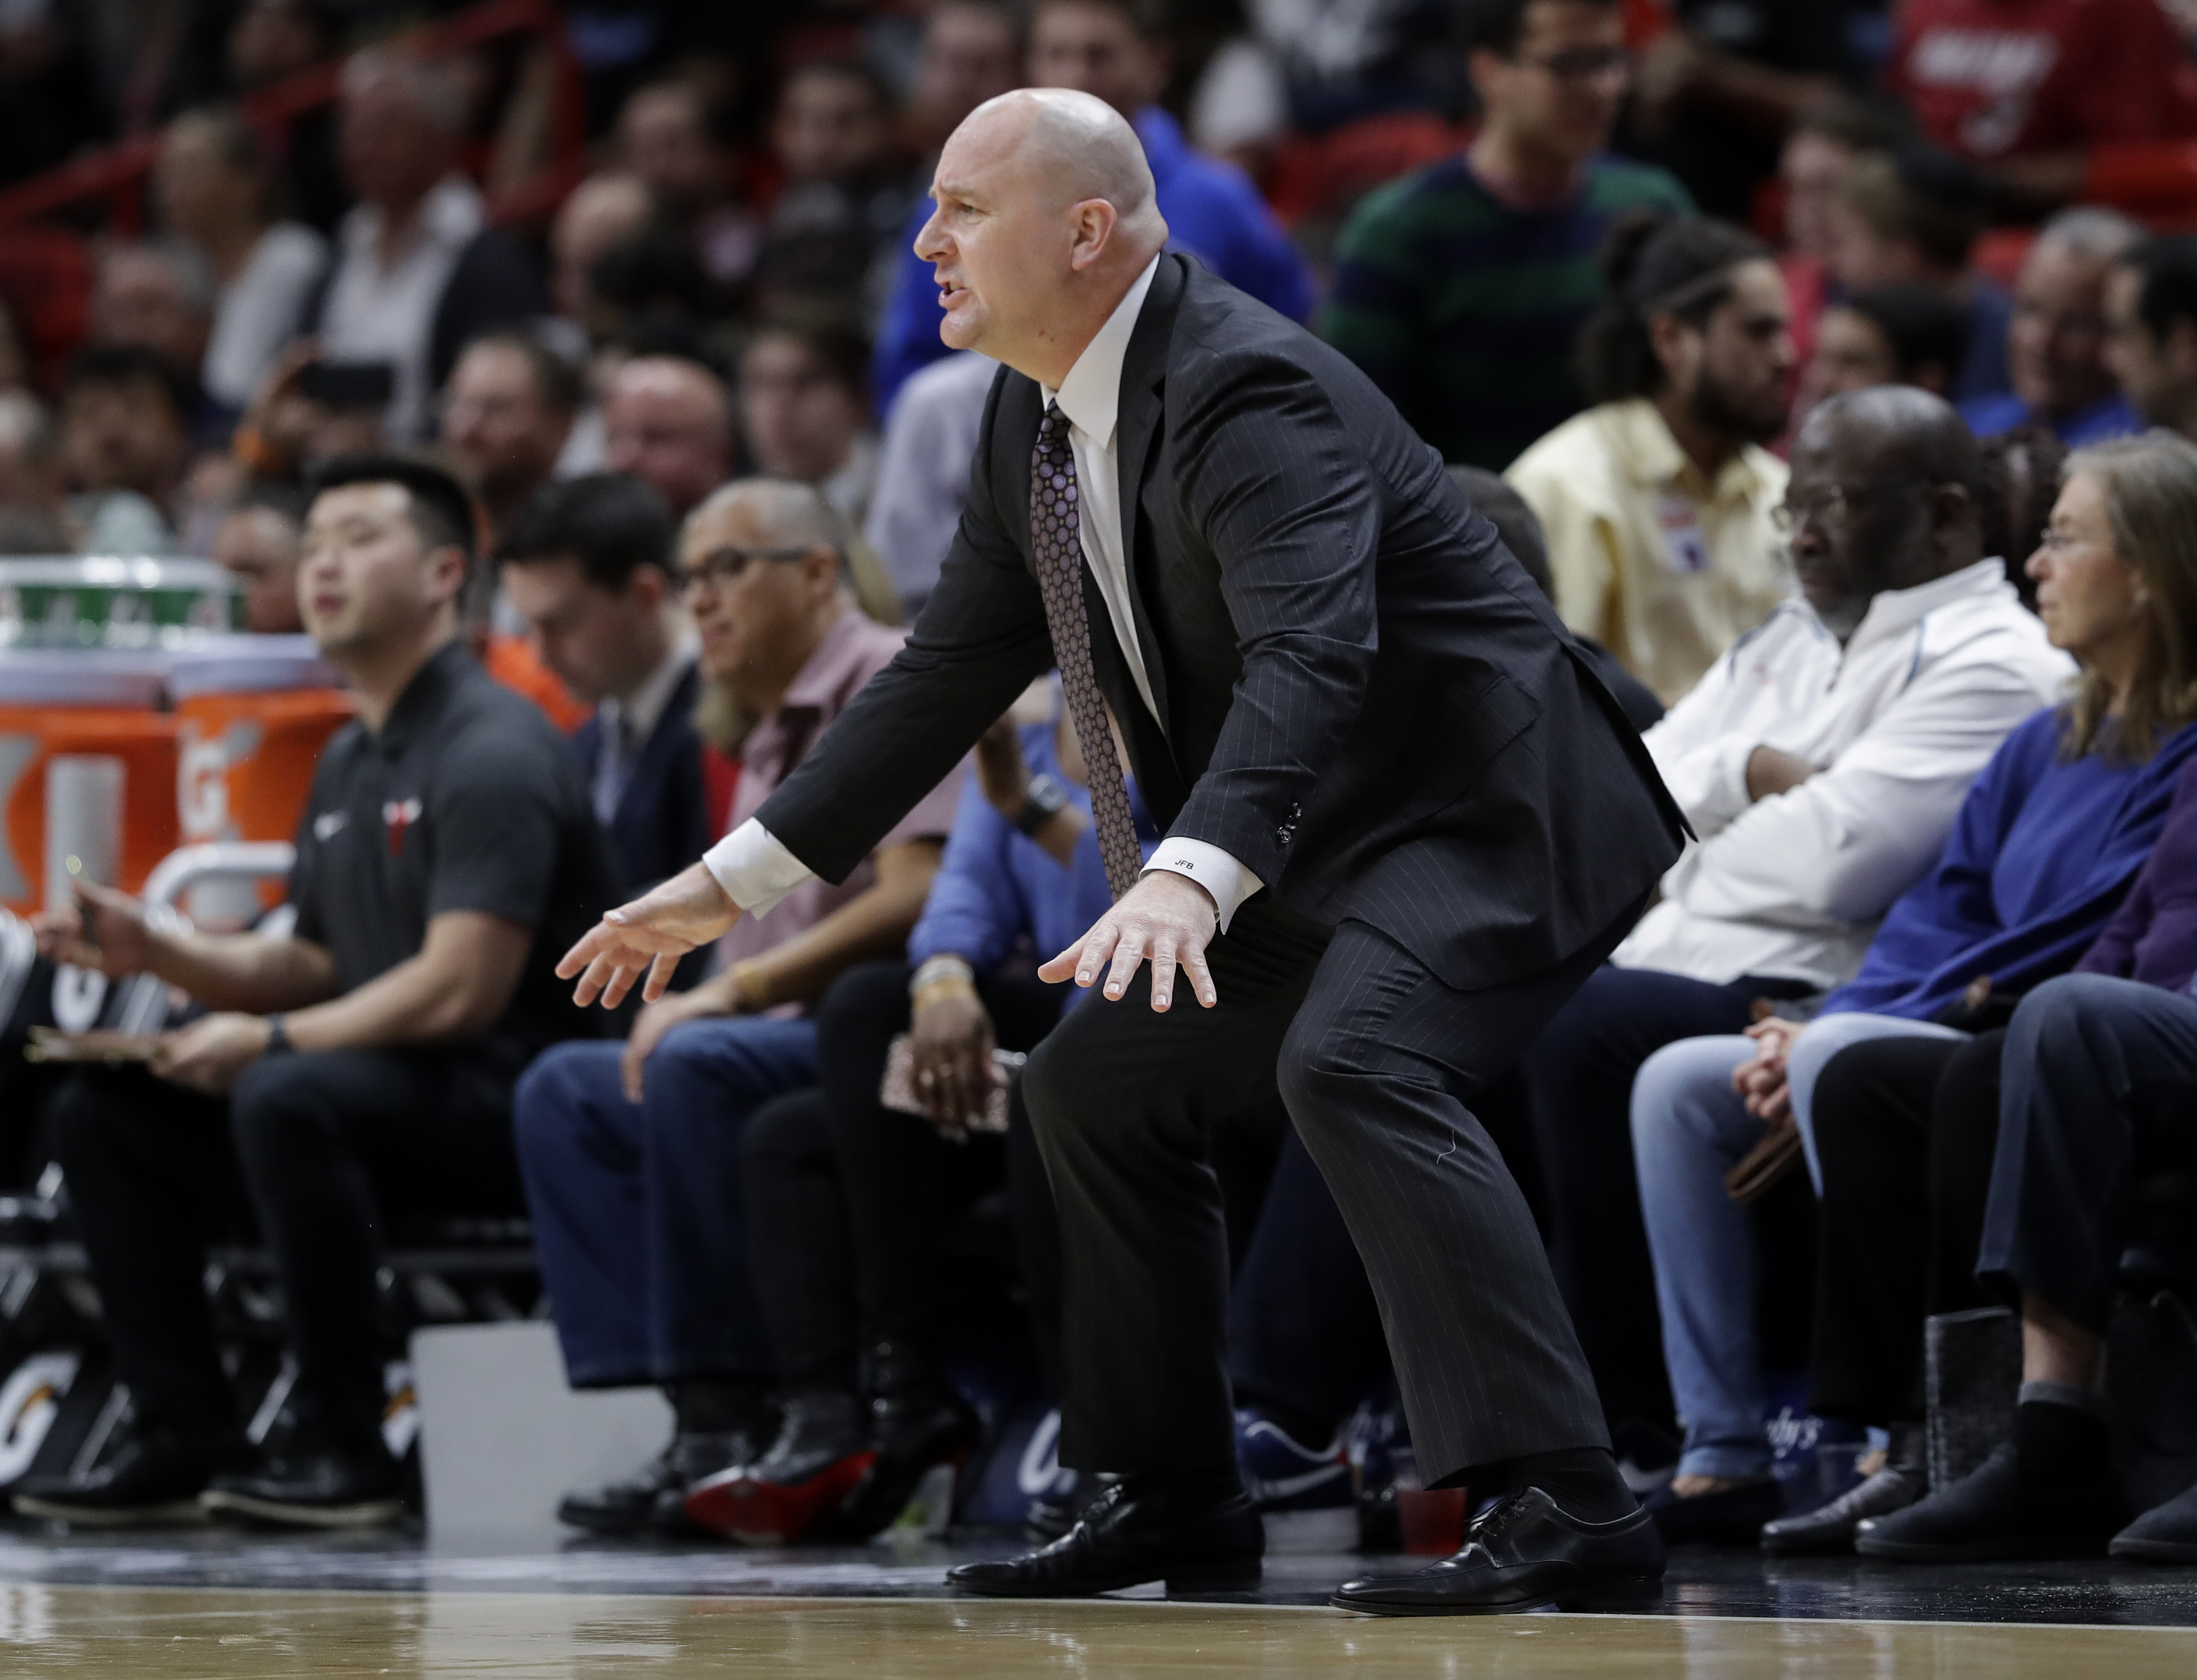 Bulls add to Heat woes at home, win 105-89